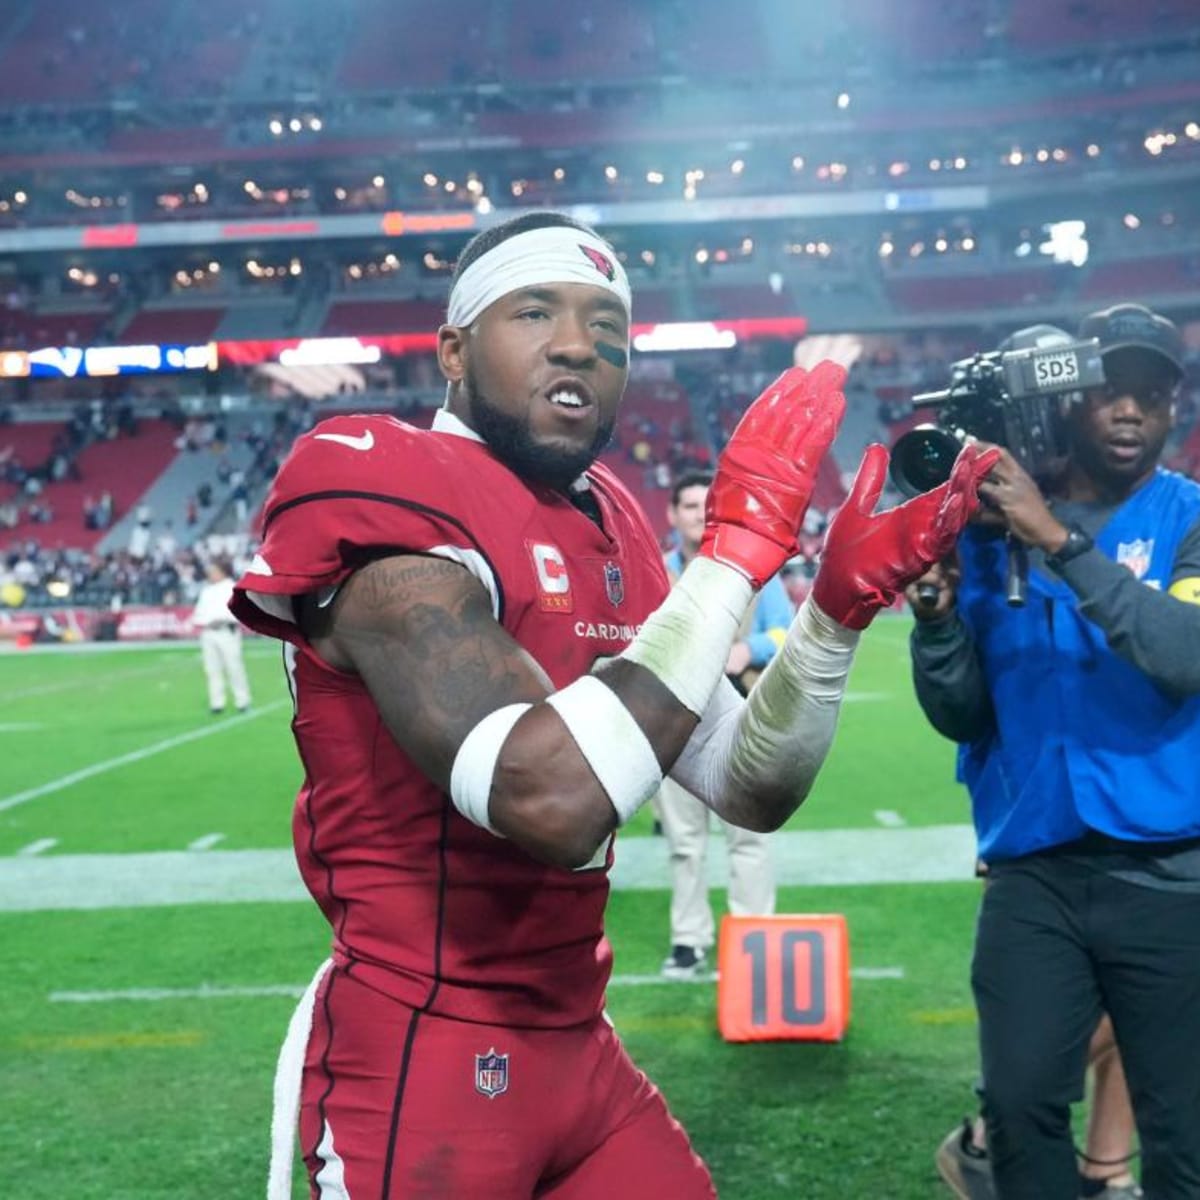 Cardinals must be cognizant of Budda Baker's disappointment